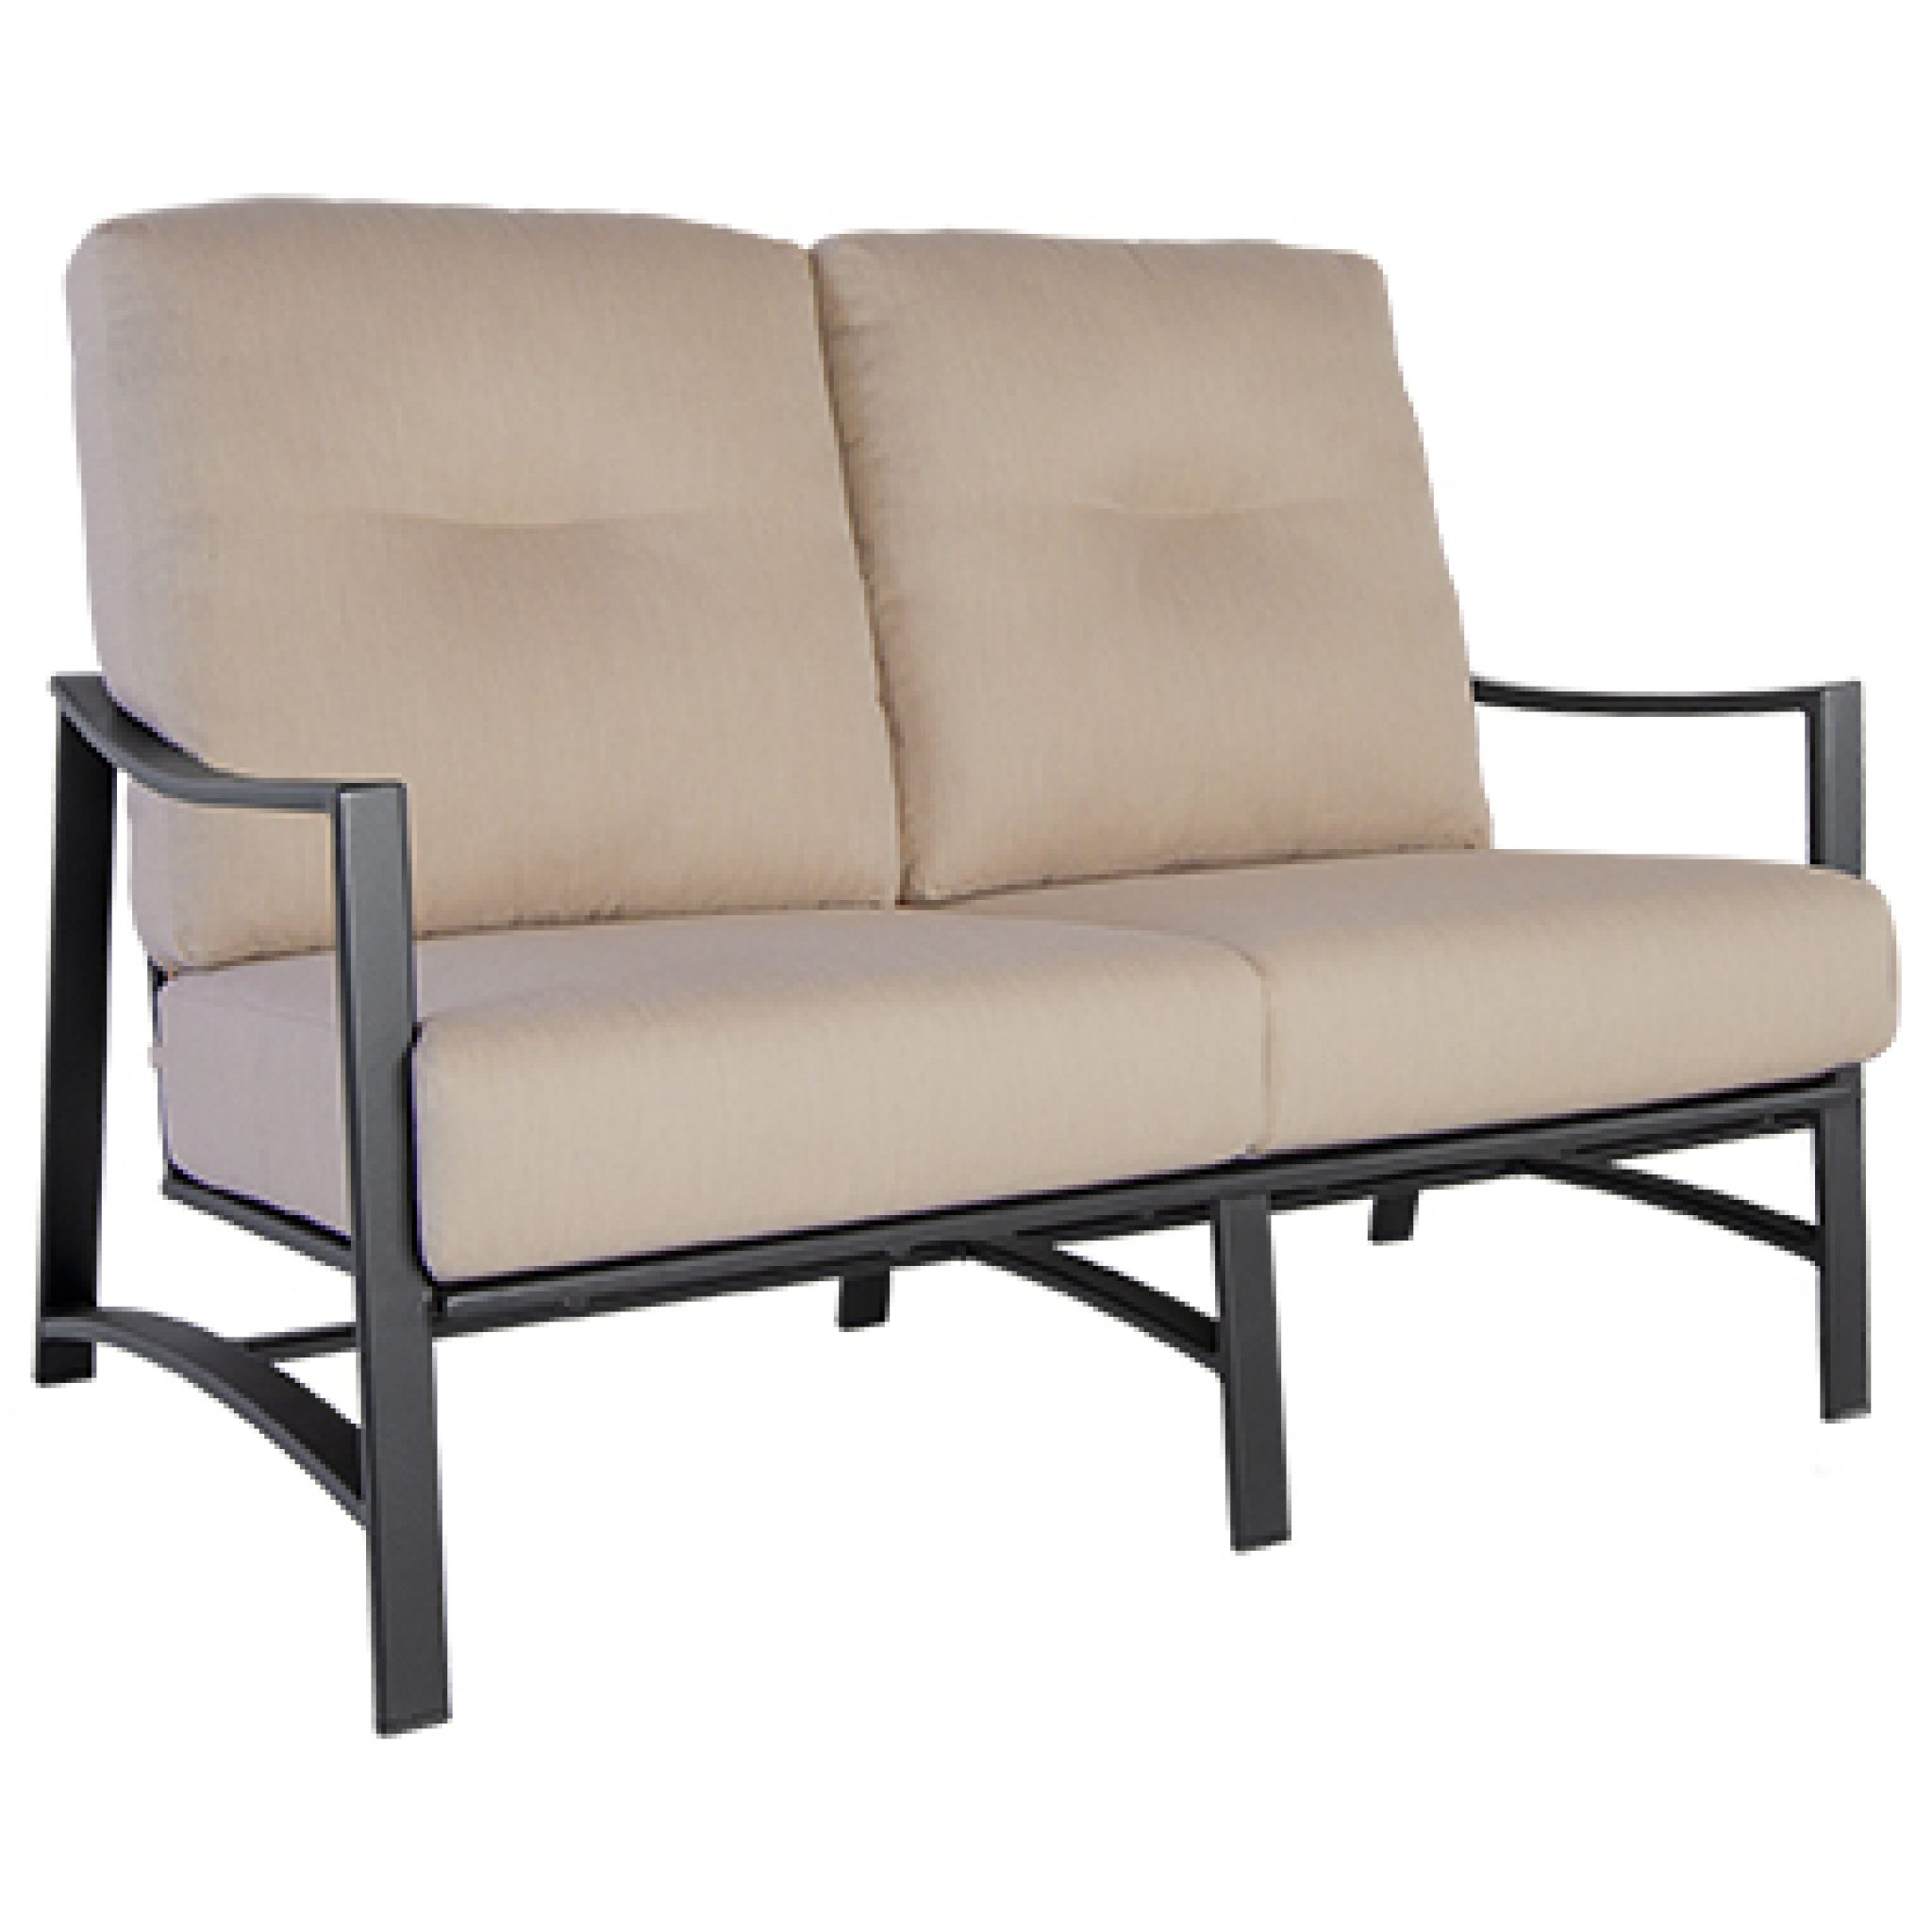 Avana Love Seat by Ow Lee